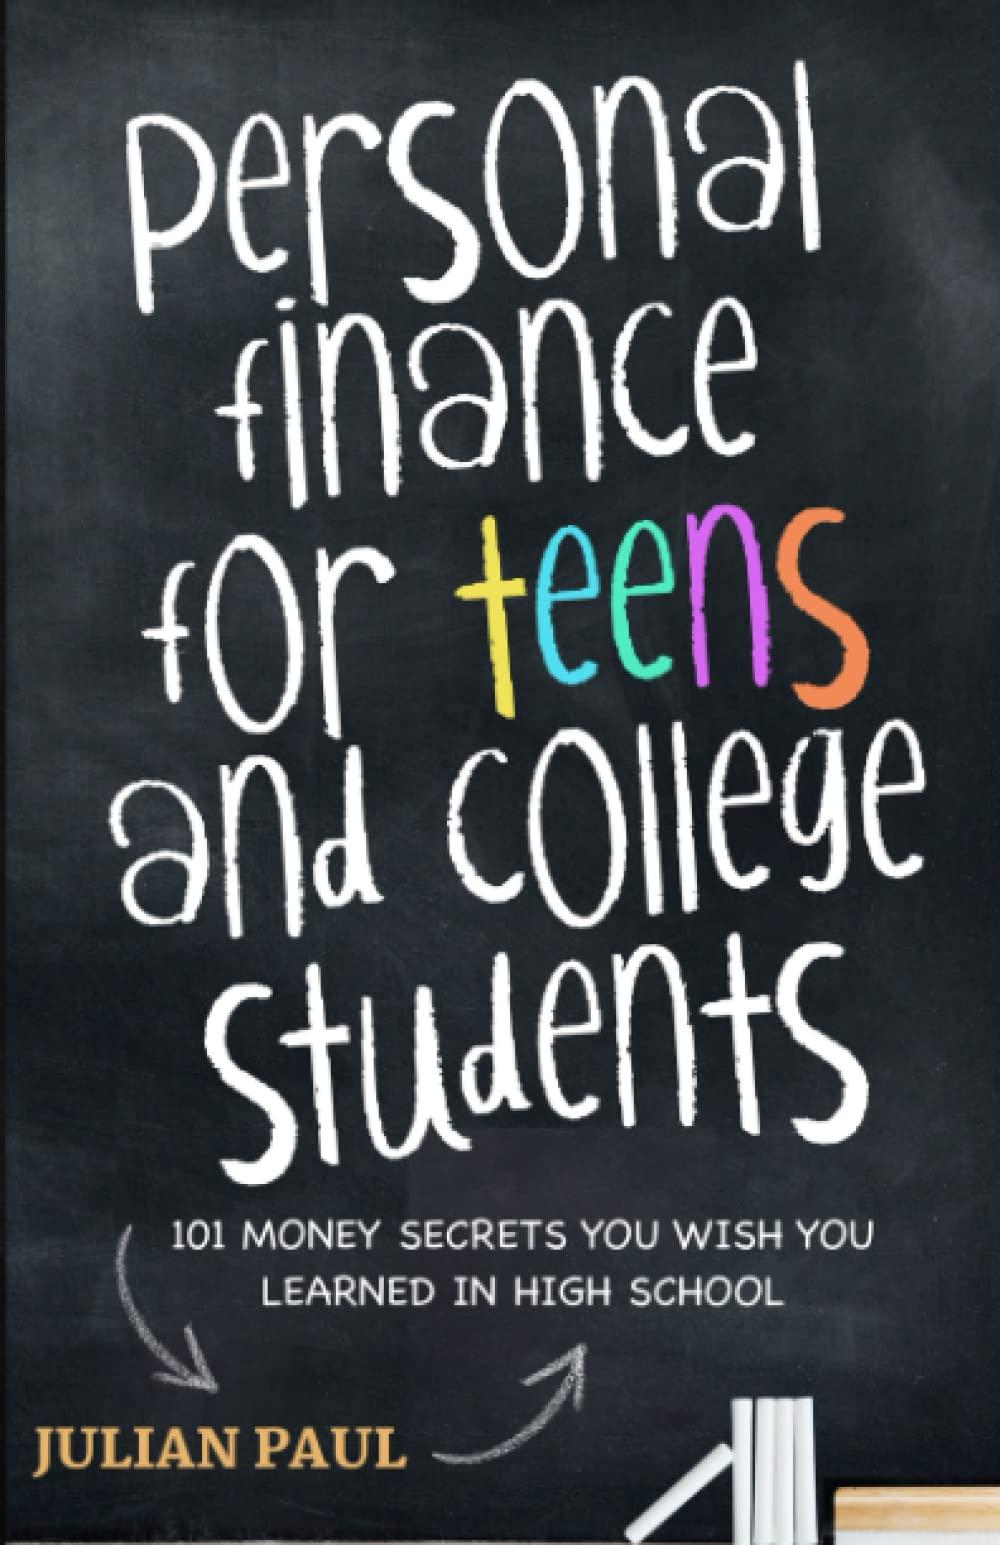 Personal Finance For Teens And College Students 101 Money Secrets You Wish You Learned In High School